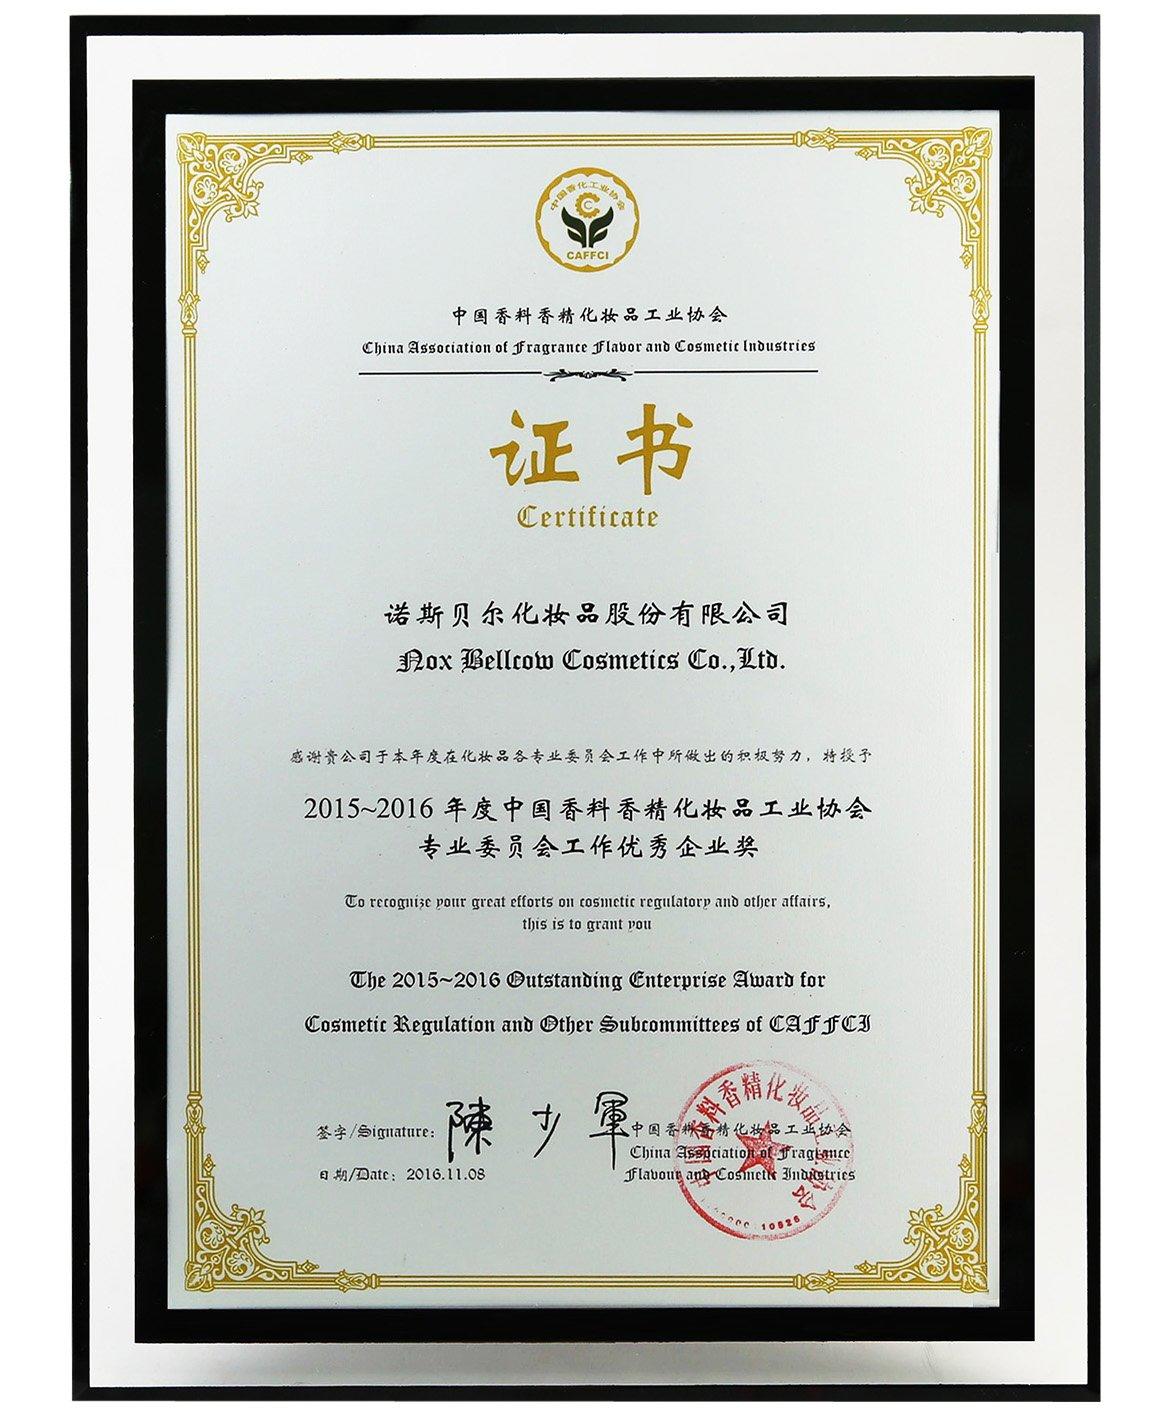 China Association of Fragrance Flavor and Cosmetic Industry Professional Committee Outstanding Enterprise Award 2015-2016